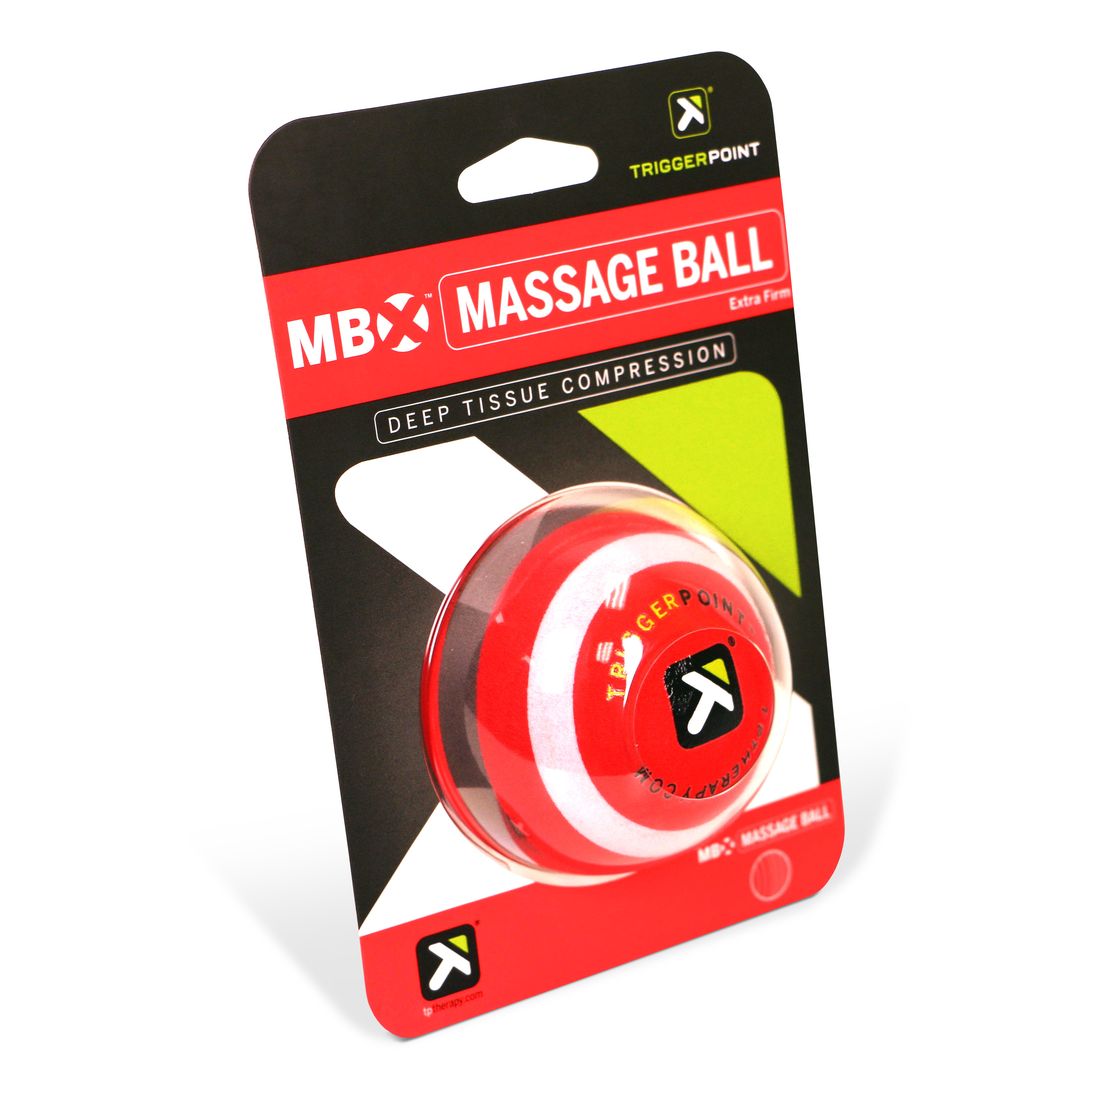 Trigger Point Mbx Massage Ball Red & White